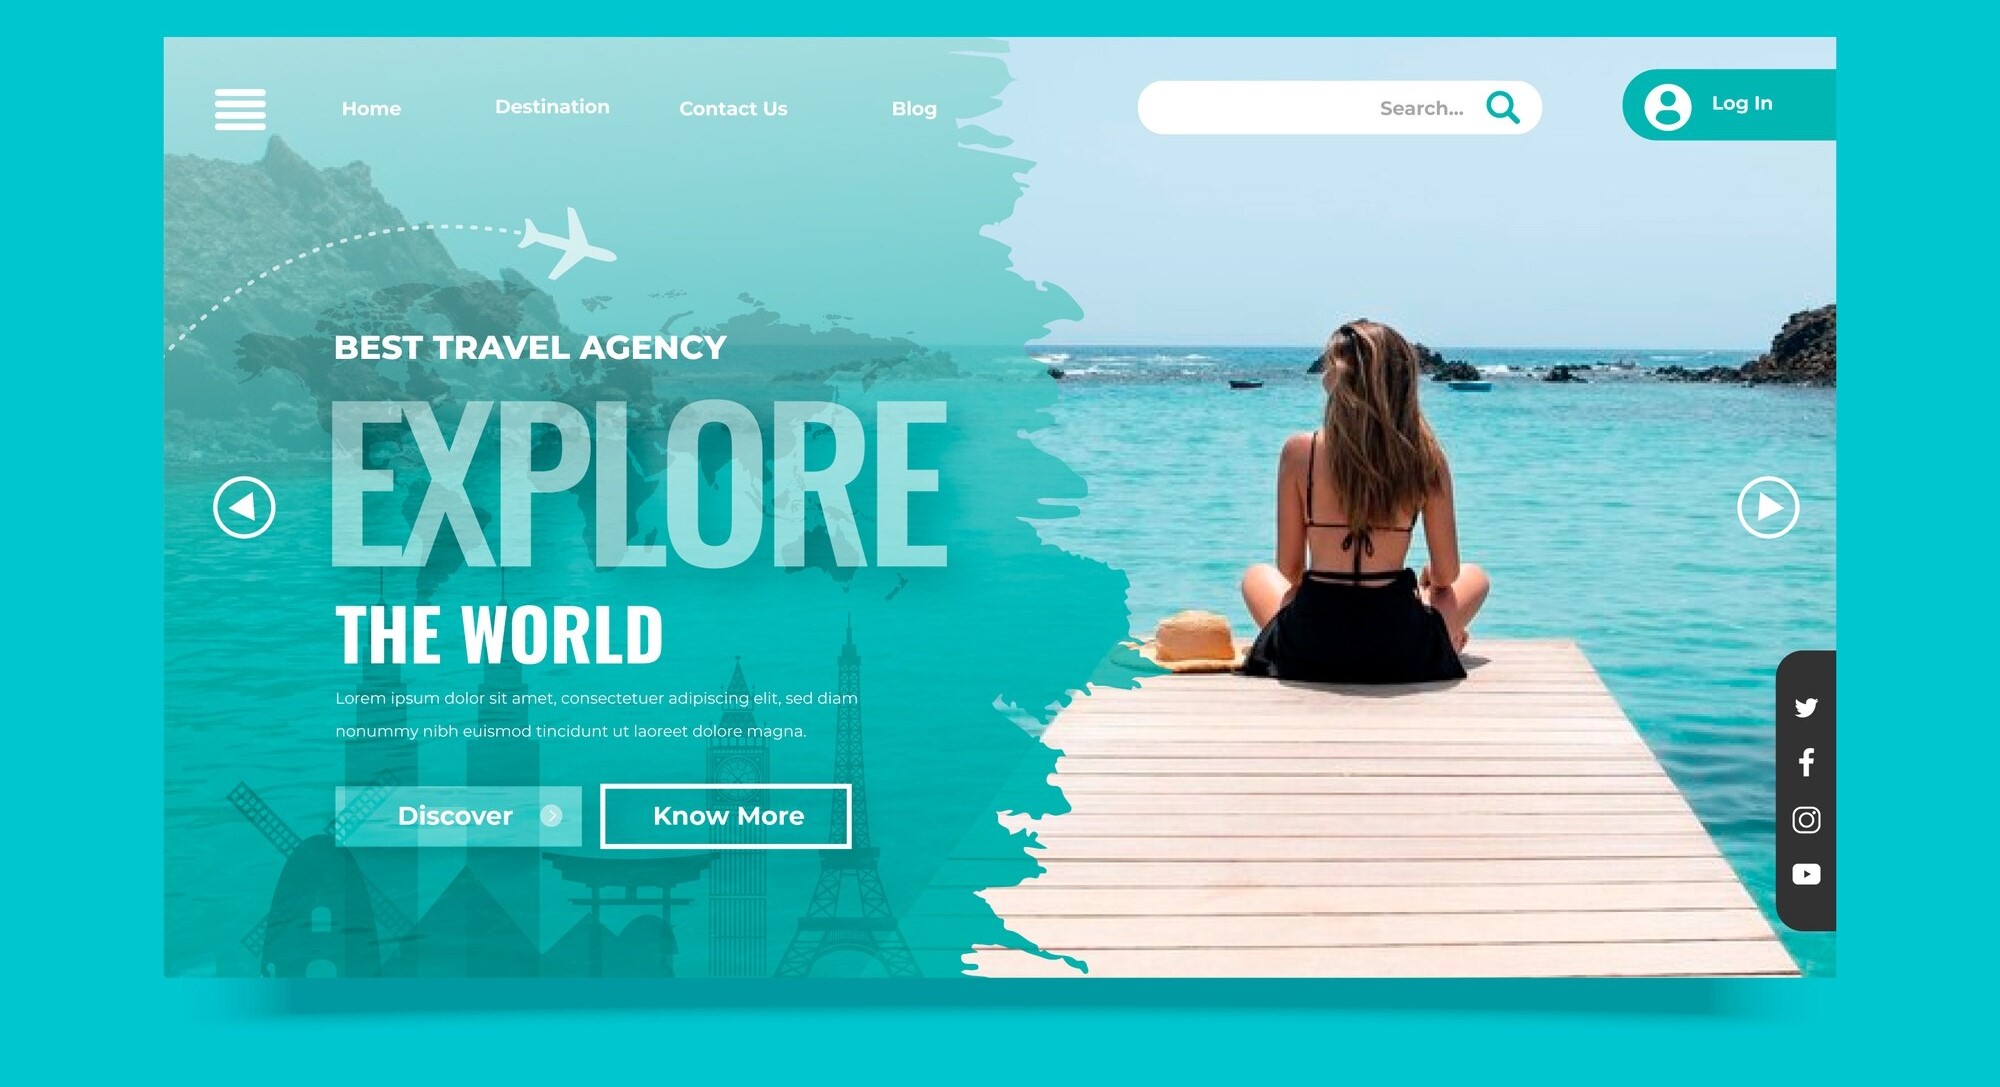 gradient-texture-travel-agency-landing-page_23-2149342695